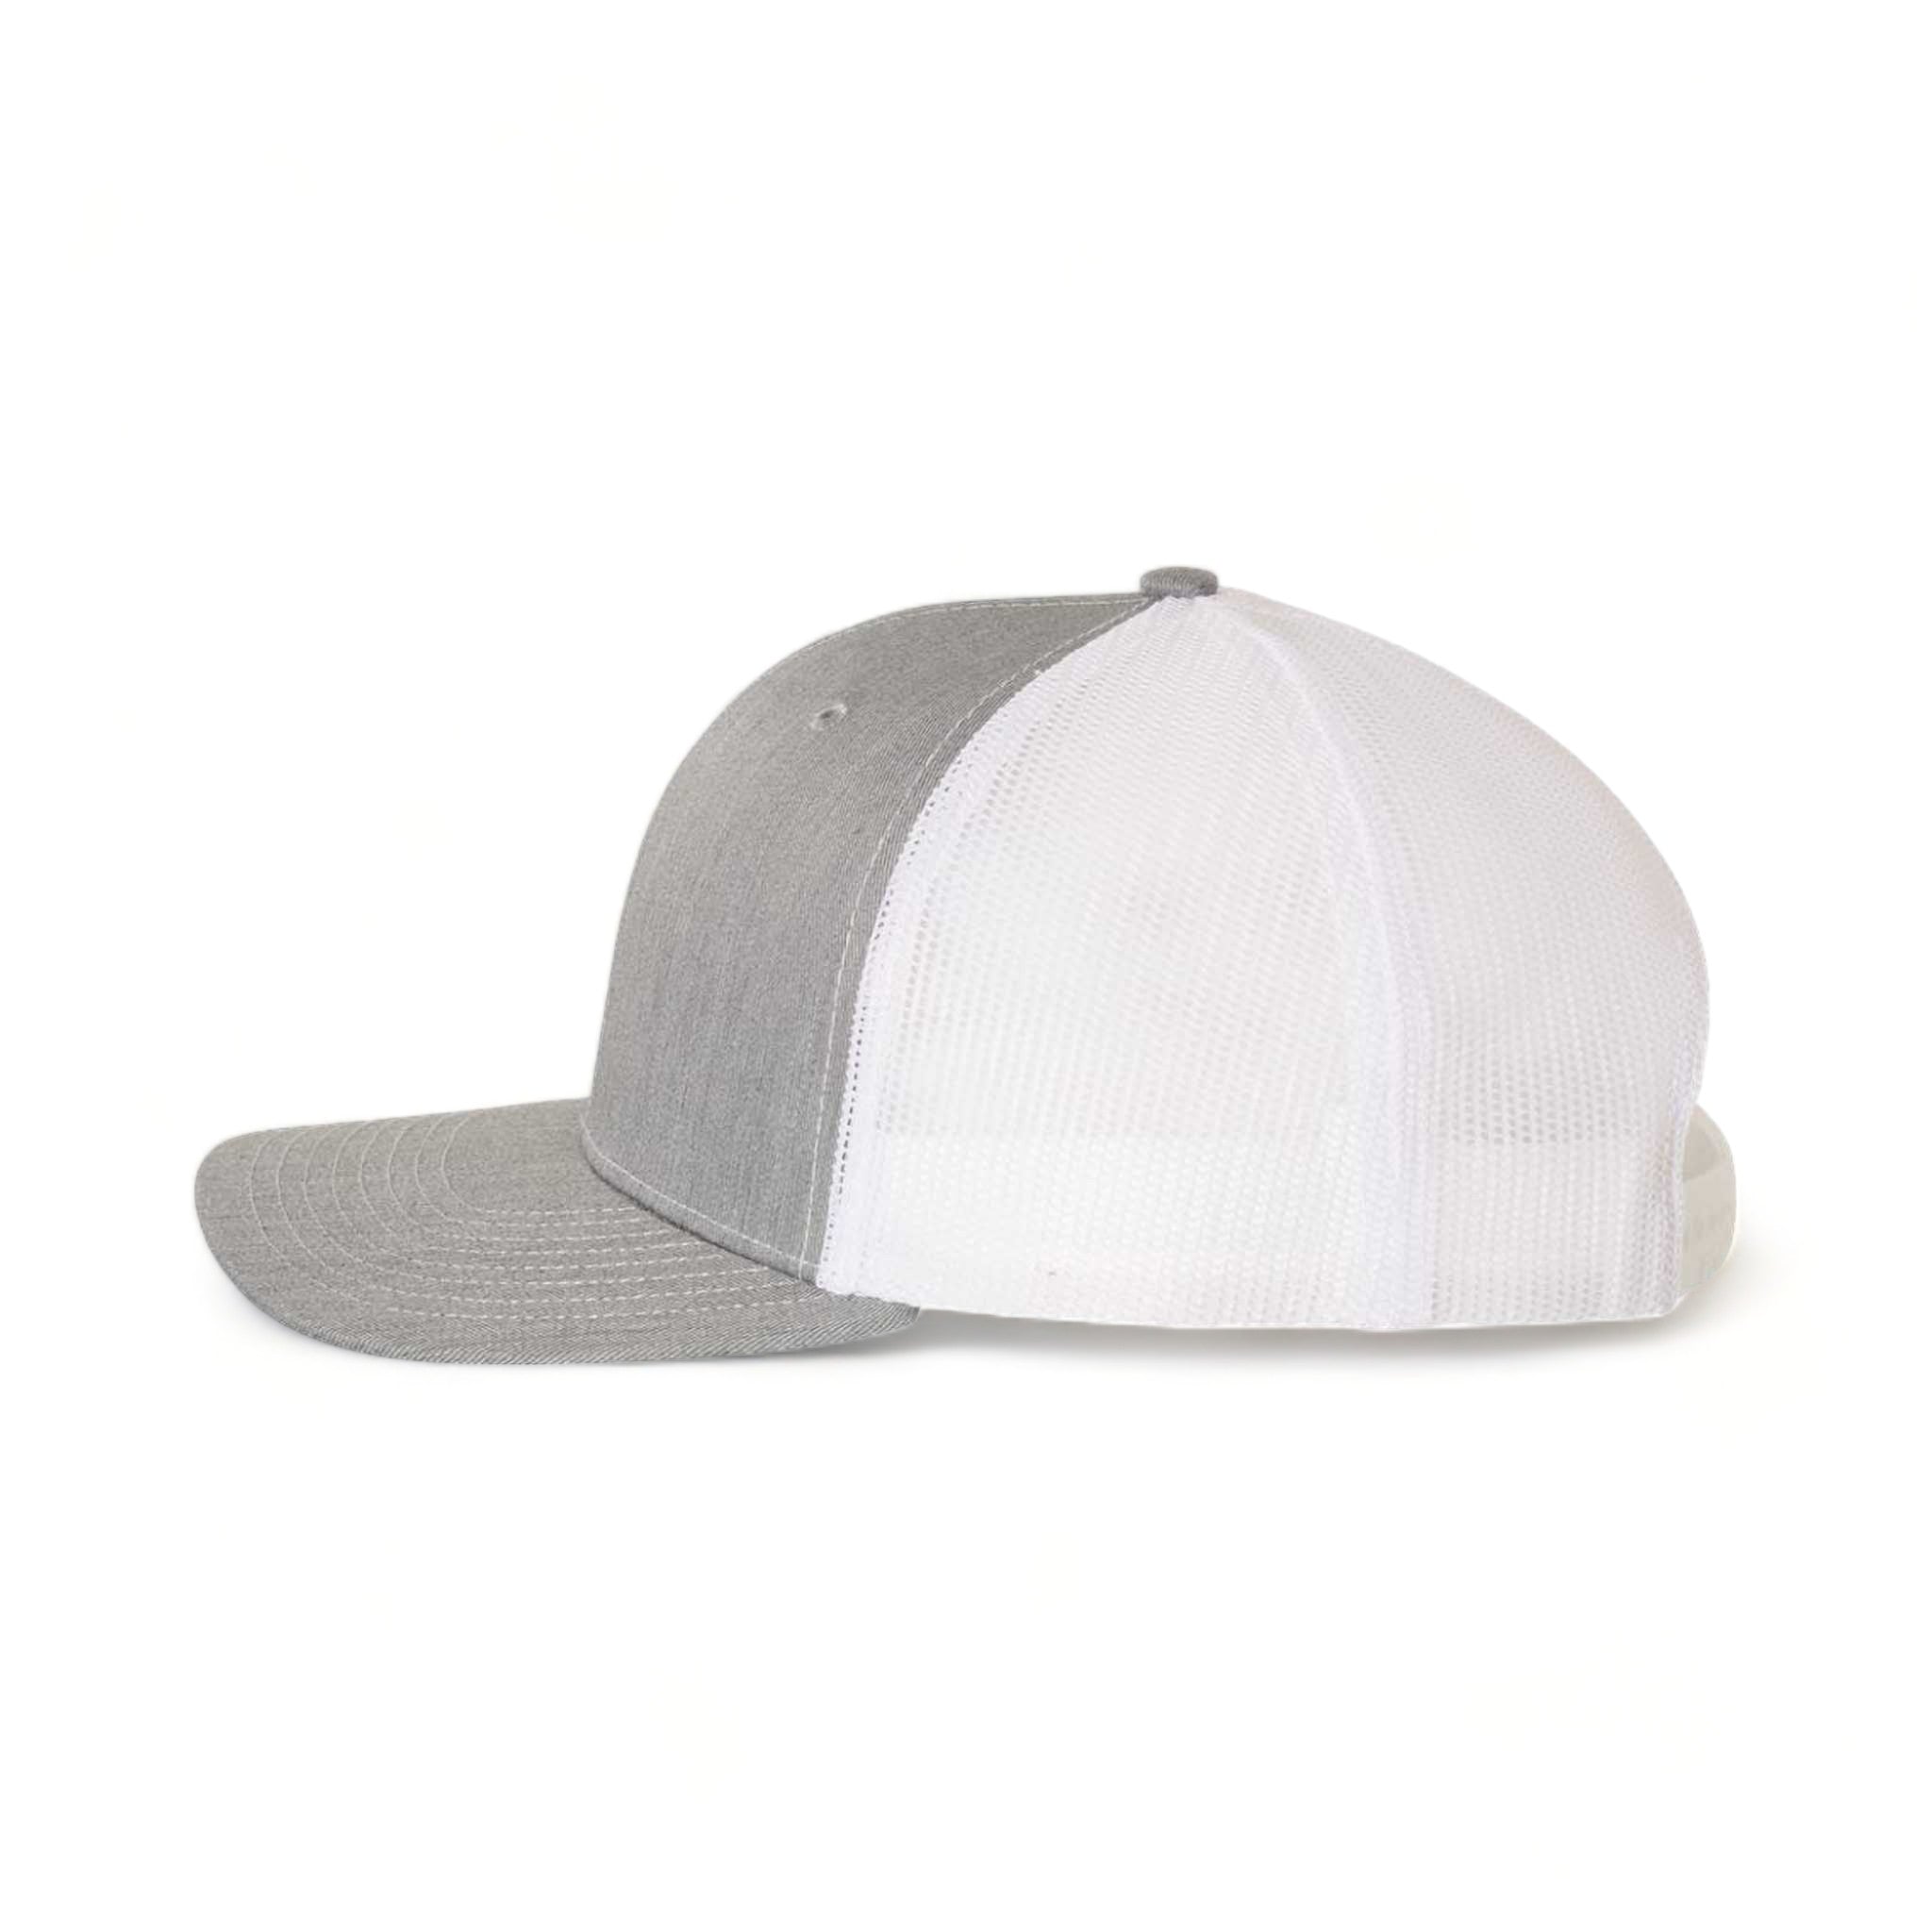 Side view of Richardson 112 custom hat in heather grey and white